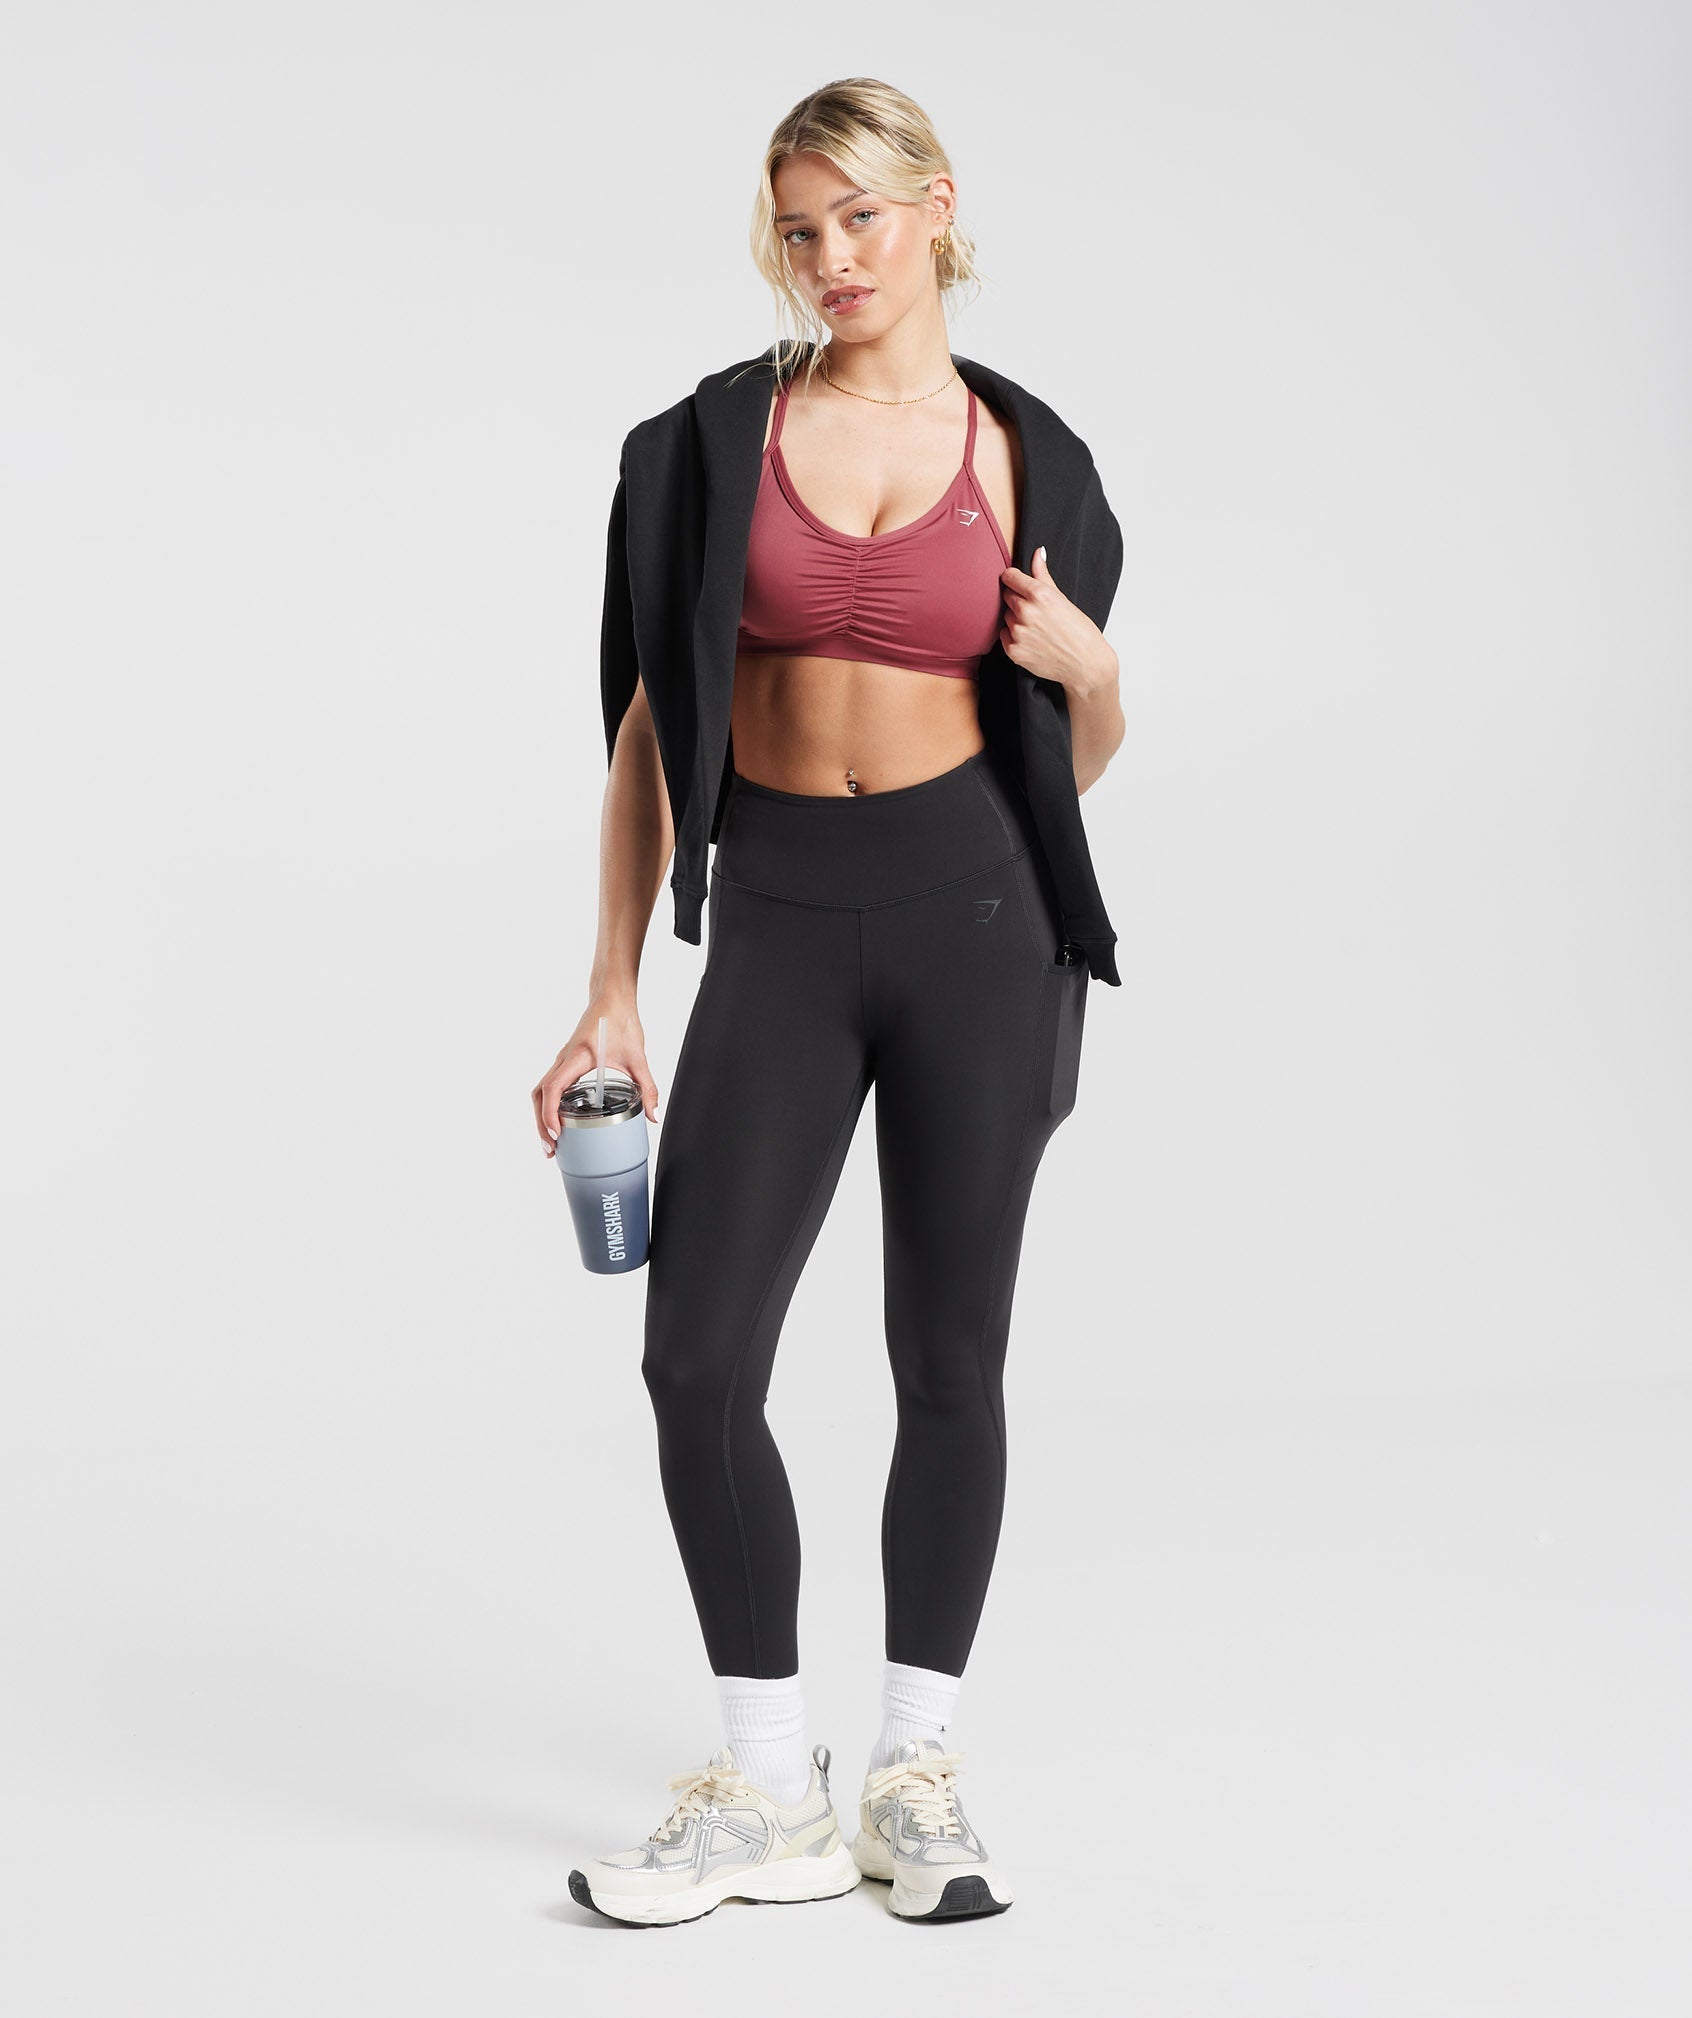 Black Tennis Leggings/Tights with Ball Pockets